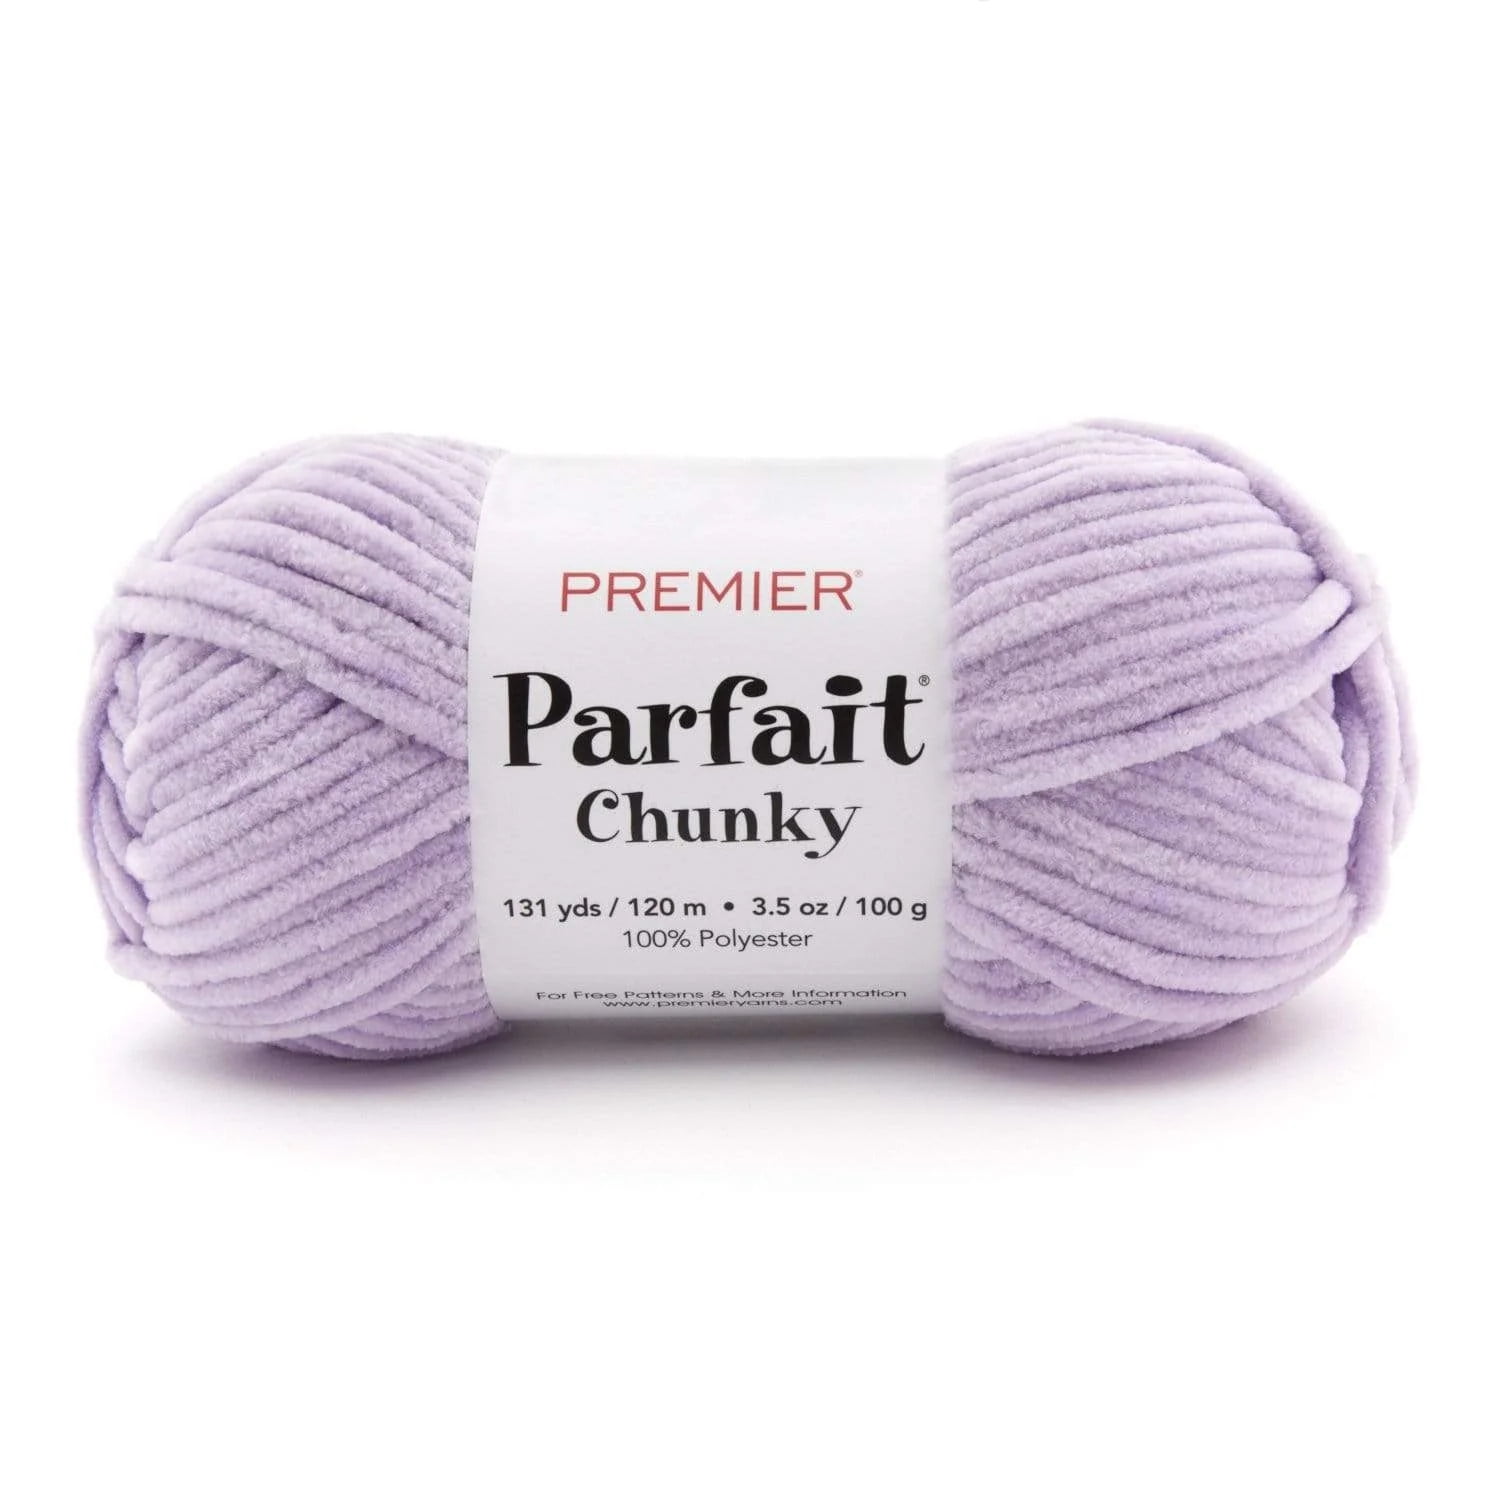 Parfait Solid Yarn-Strawberry-Material:Polyester,Yarn Weight:#5-Bulky